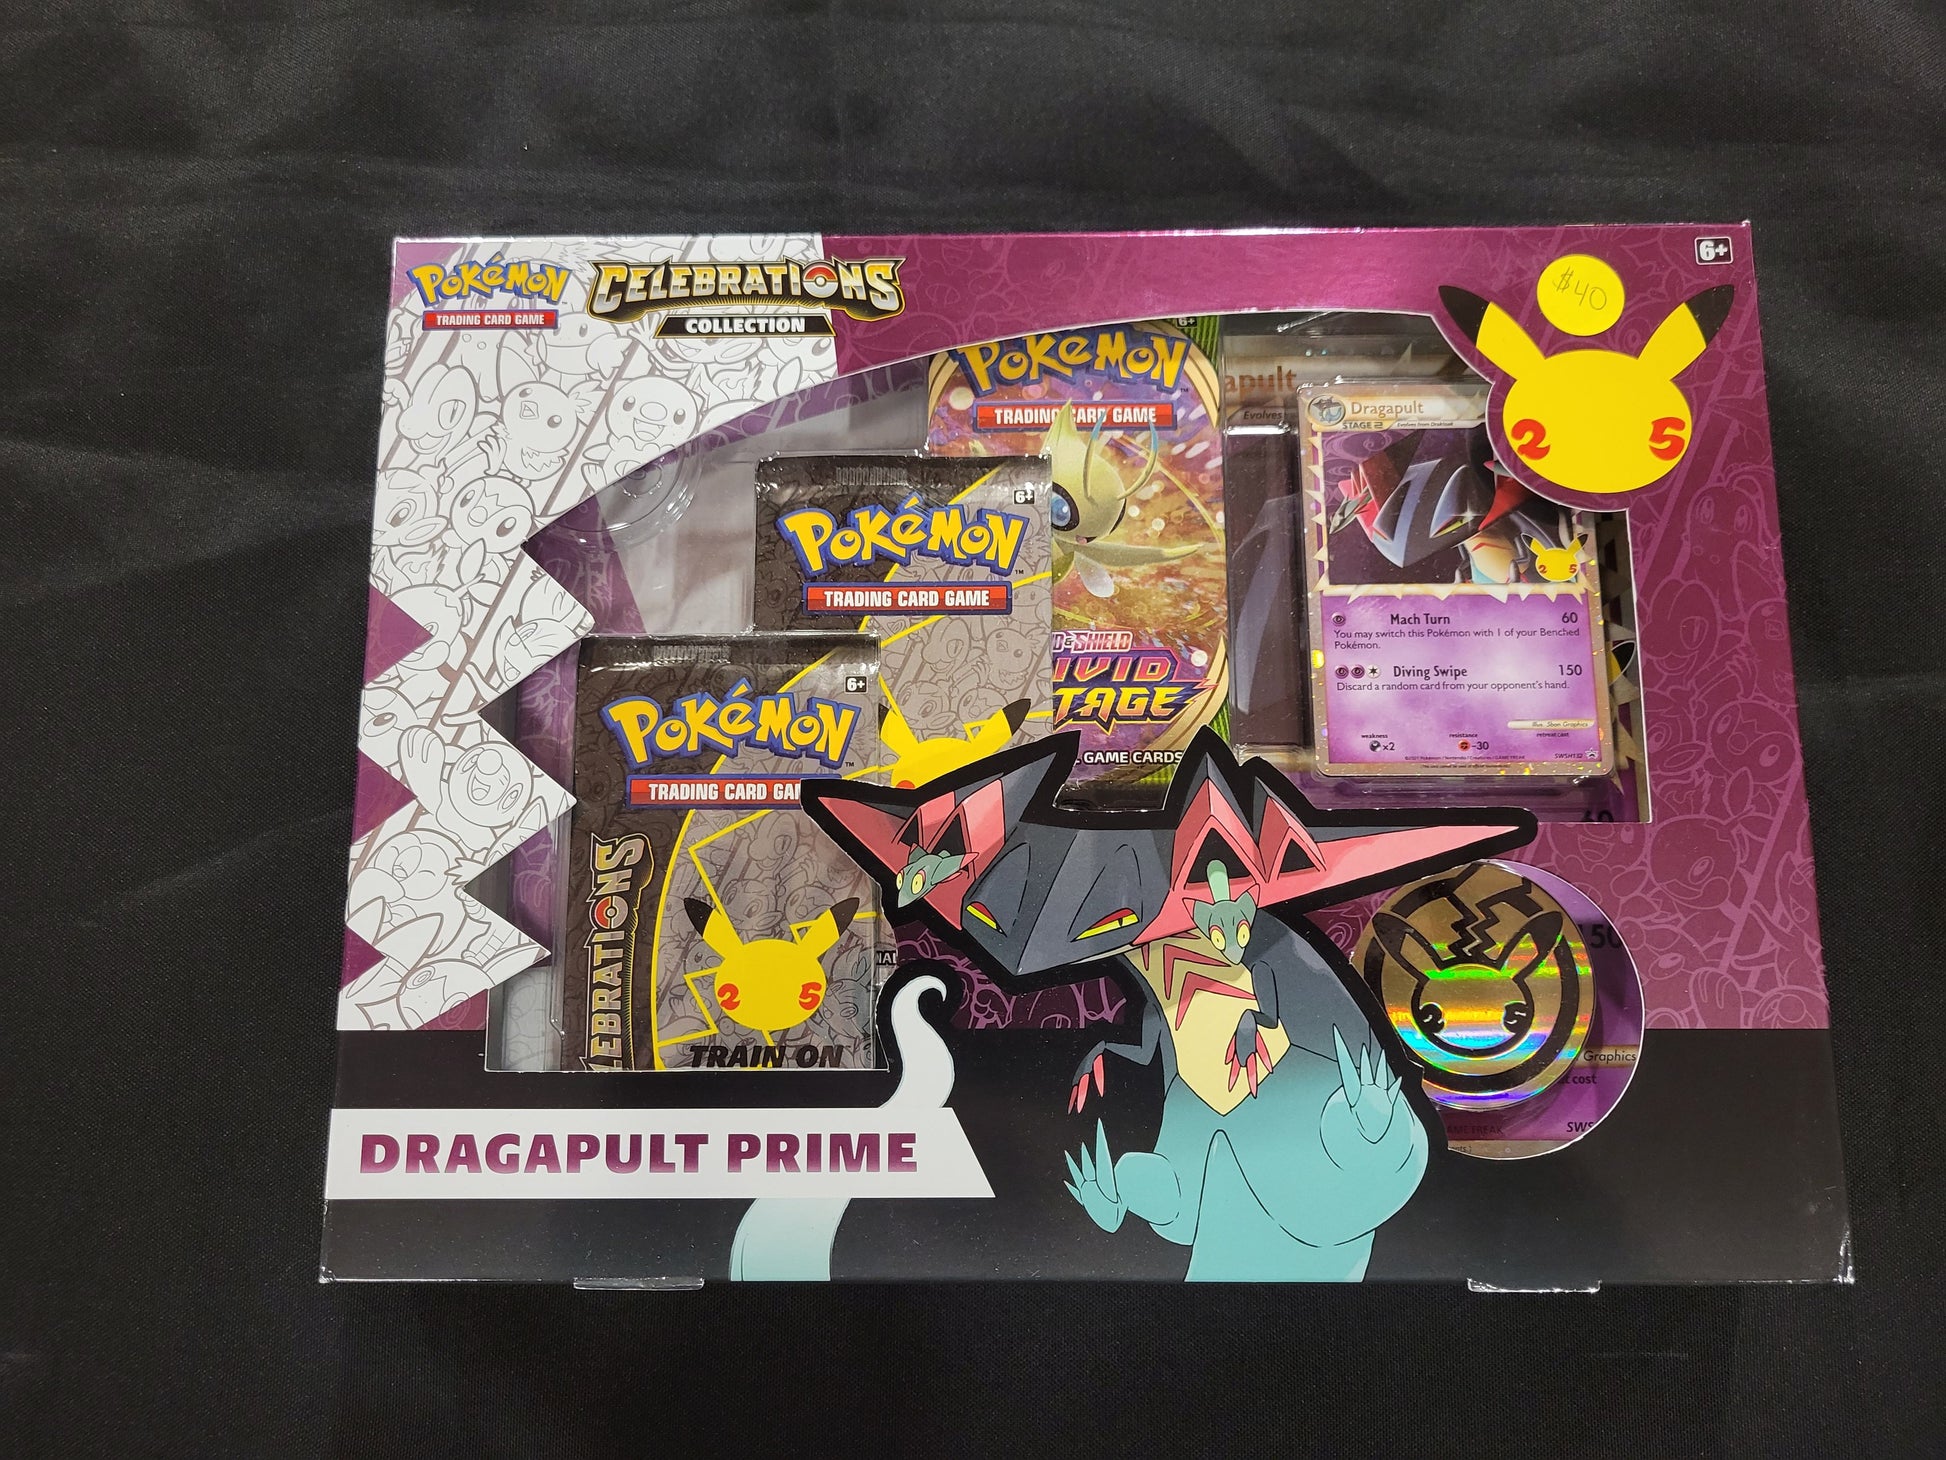 Each Dragapult box comes with one oversized Dragapult card, one Celebrations Dragapult card, one online code card, two Celebrations packs and one tcg pack.